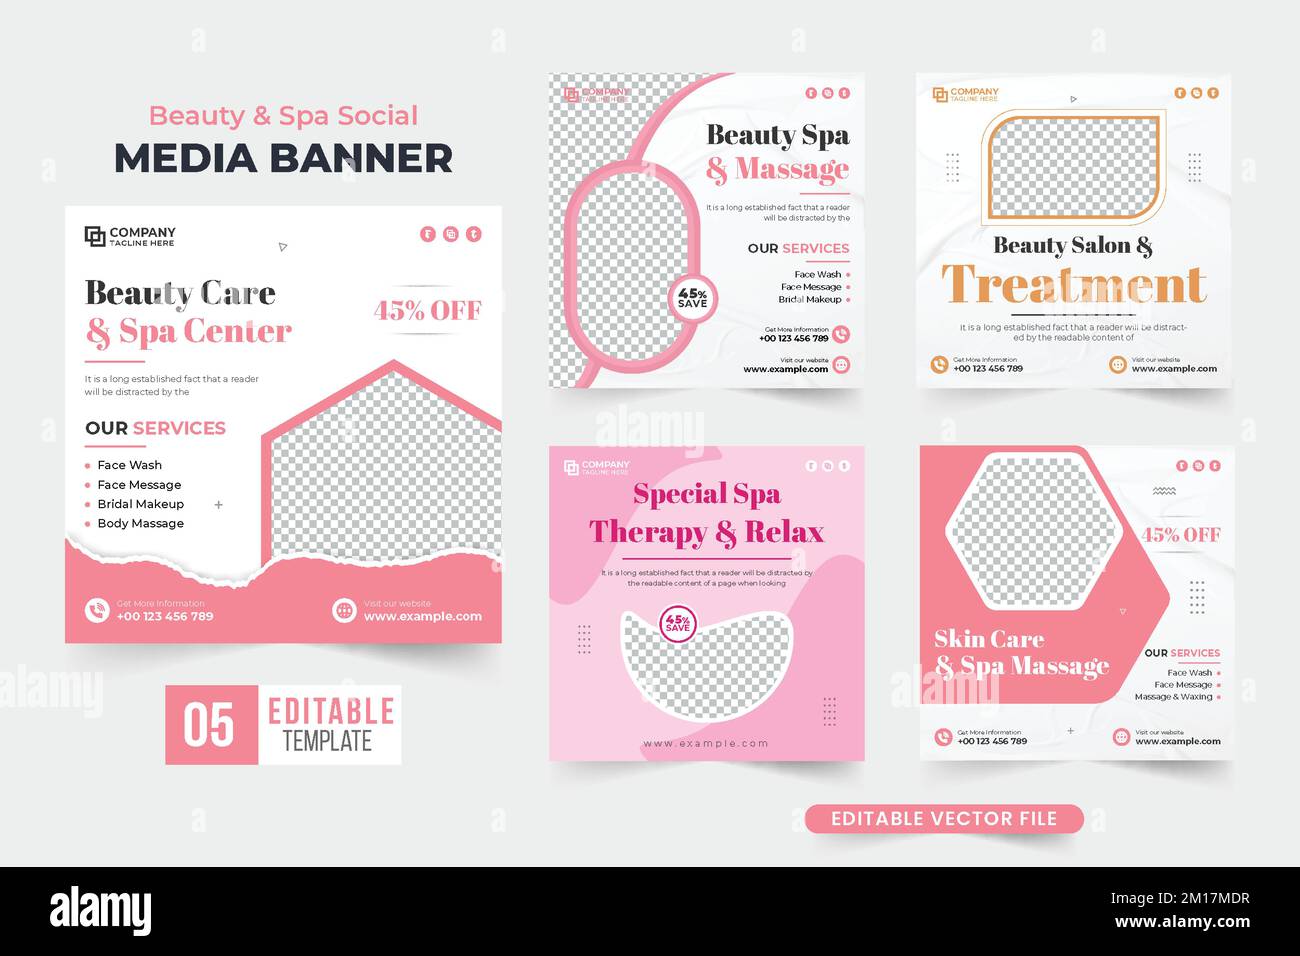 Skincare and massage parlor advertisement web banner collection with pink and dark colors. Spa therapy business promotion poster bundle for marketing. Stock Vector